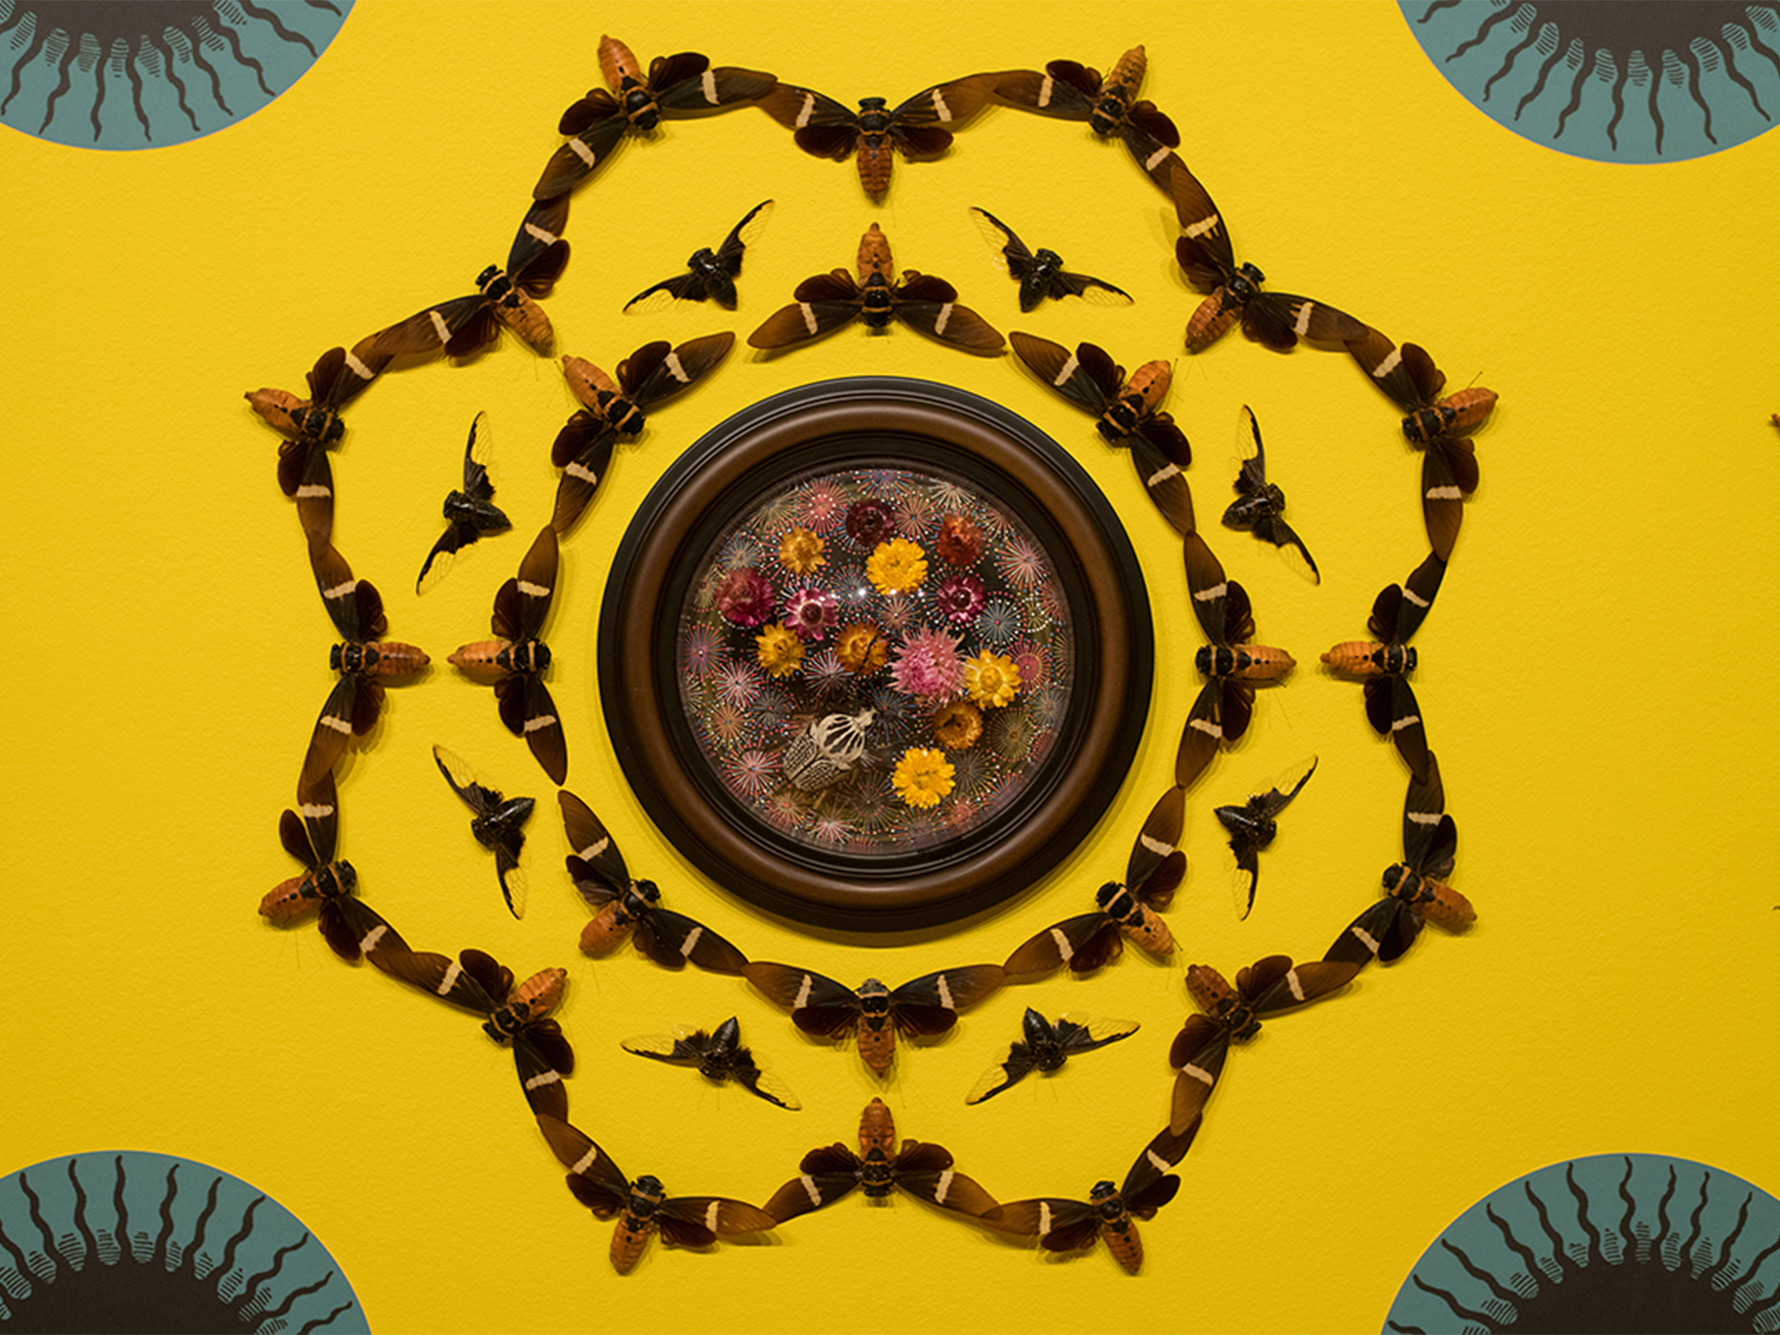 Yellow background with insects pinned in a kaleidoscope pattern.